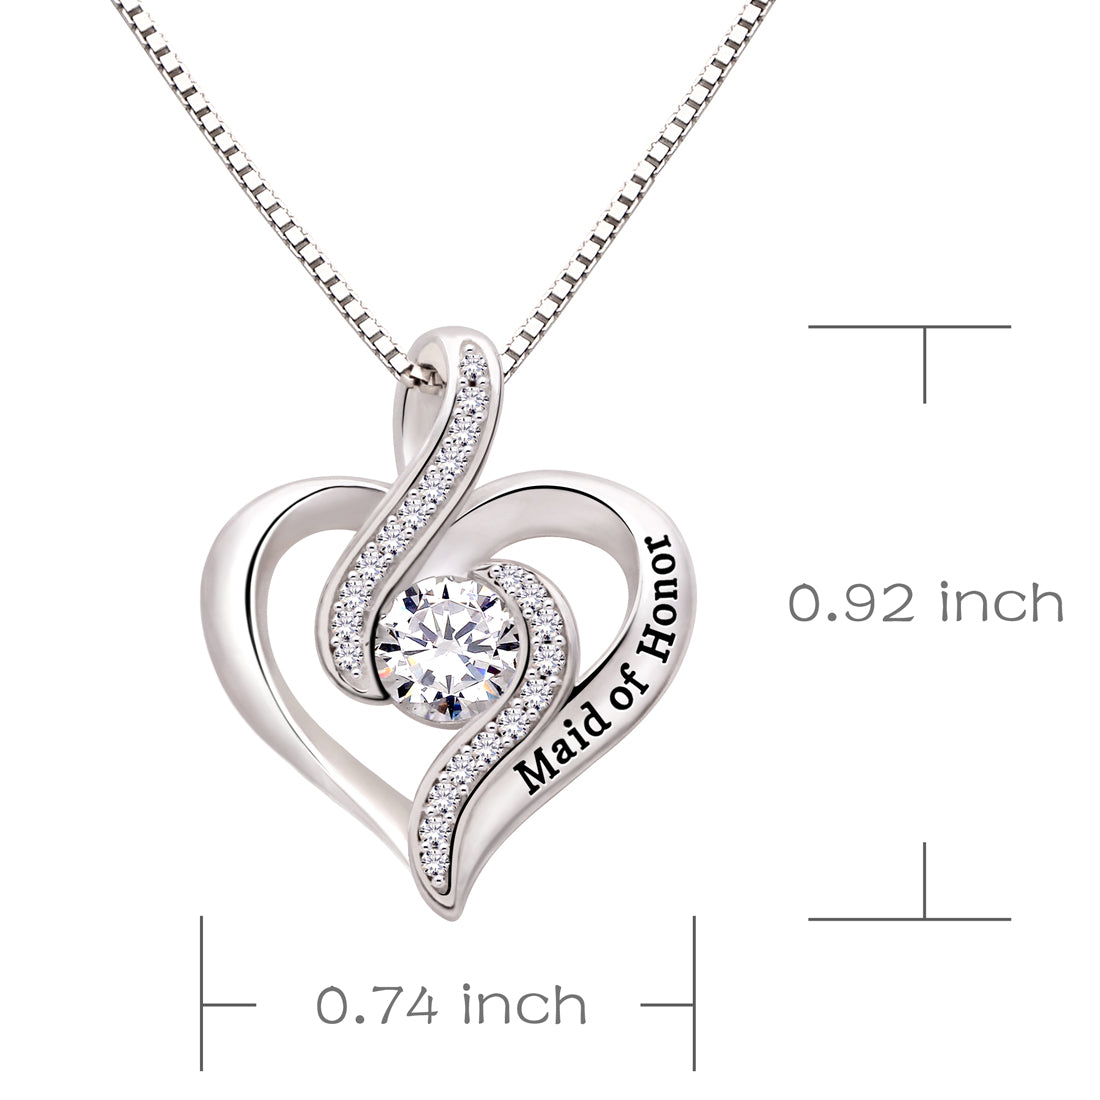 ALOV Jewelry Sterling Silver Maid of Honor Cubic Zirconia Pendant Necklace